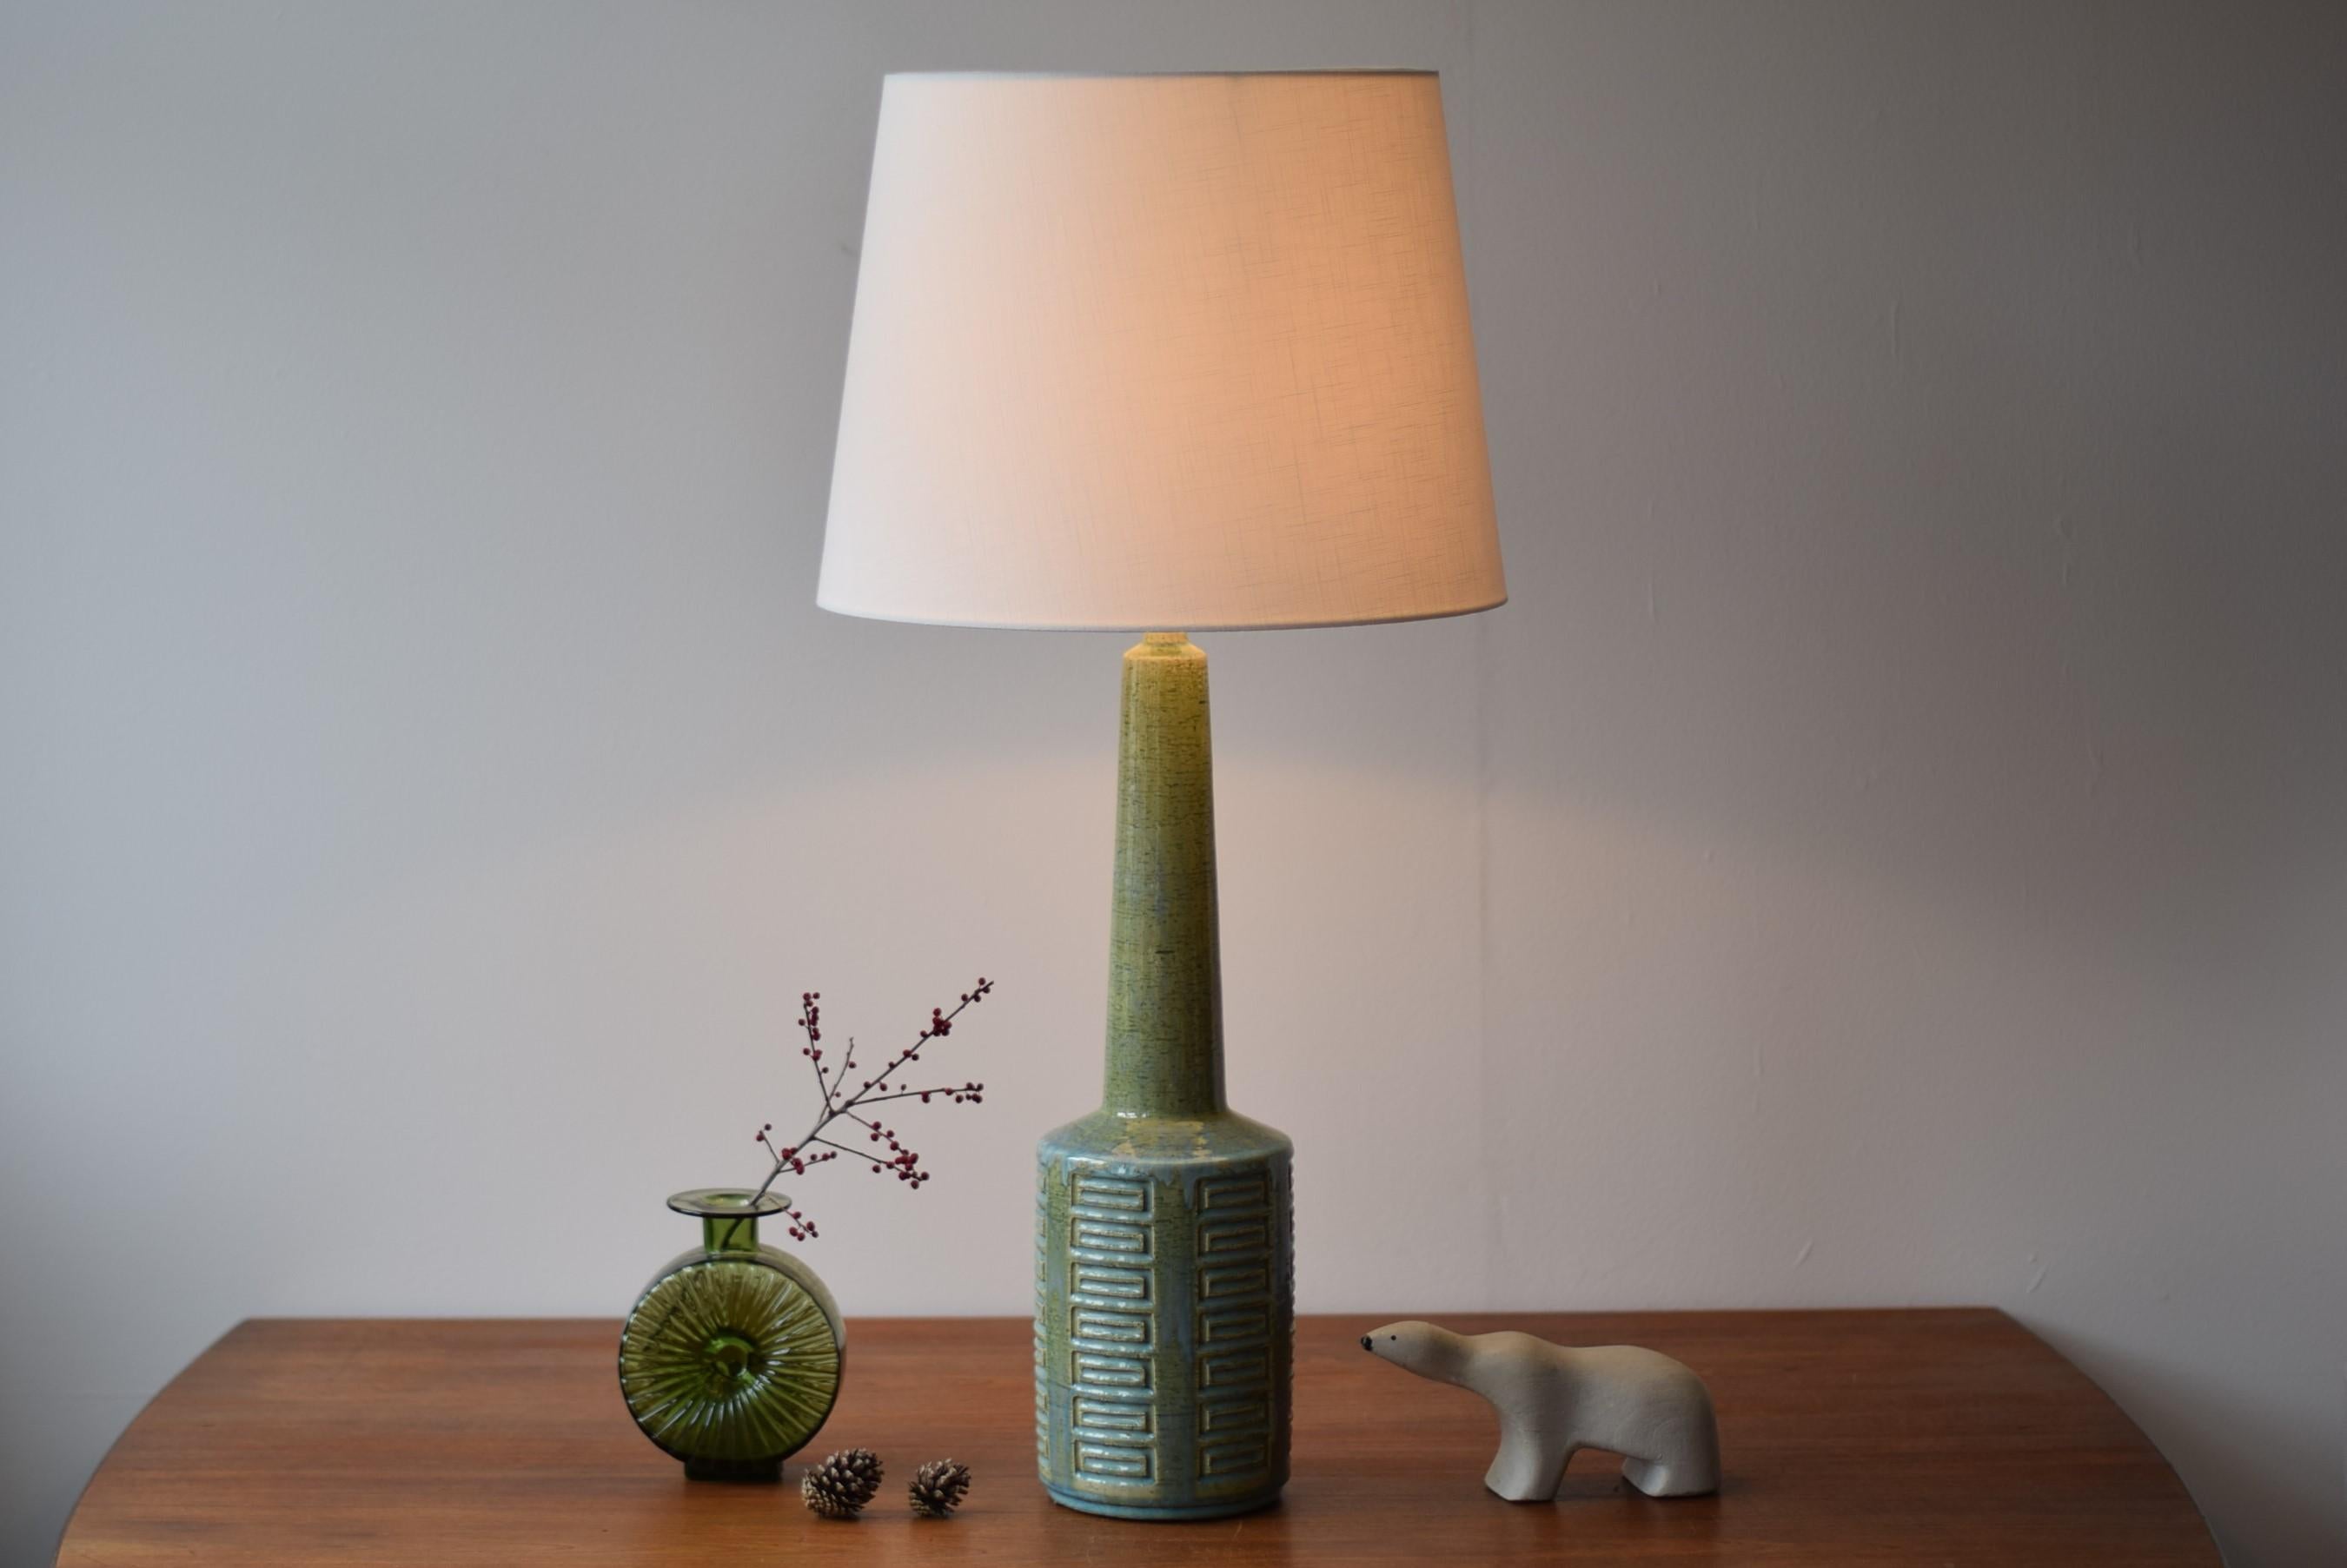 Midcentury tall table lamp from Danish Palshus.
The lamp was designed by Per Linnemann-Schmidt and produced, circa 1960s or early 1970s.
It is made with chamotte clay which gives a rough and vivid surface. The glaze is grass green glaze with pale